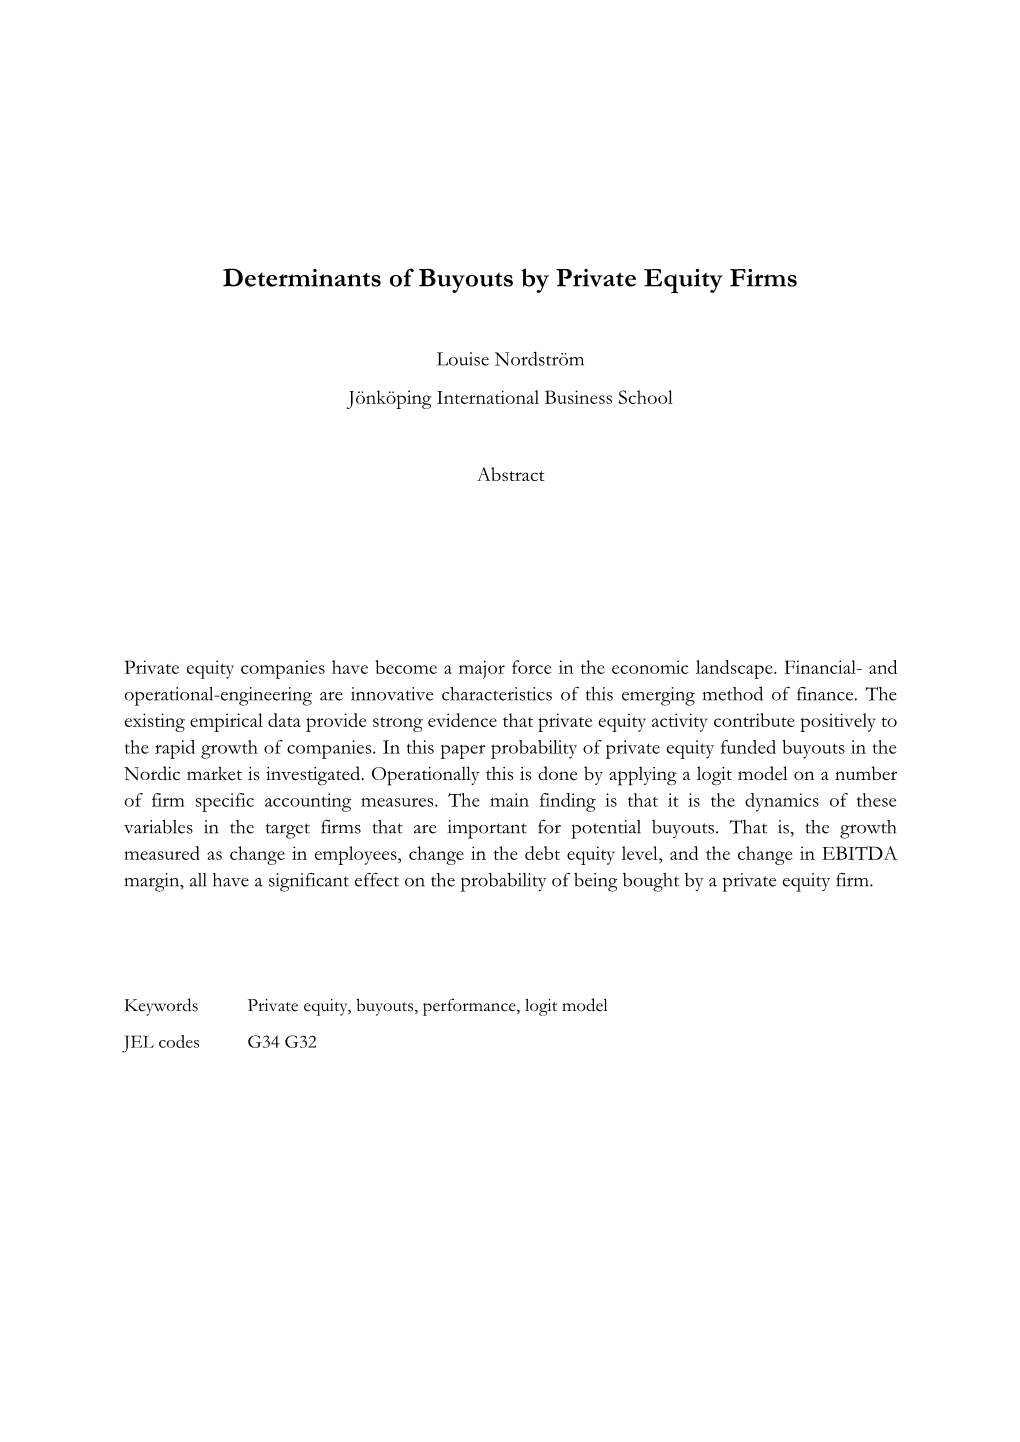 Determinants of Buyouts by Private Equity Firms